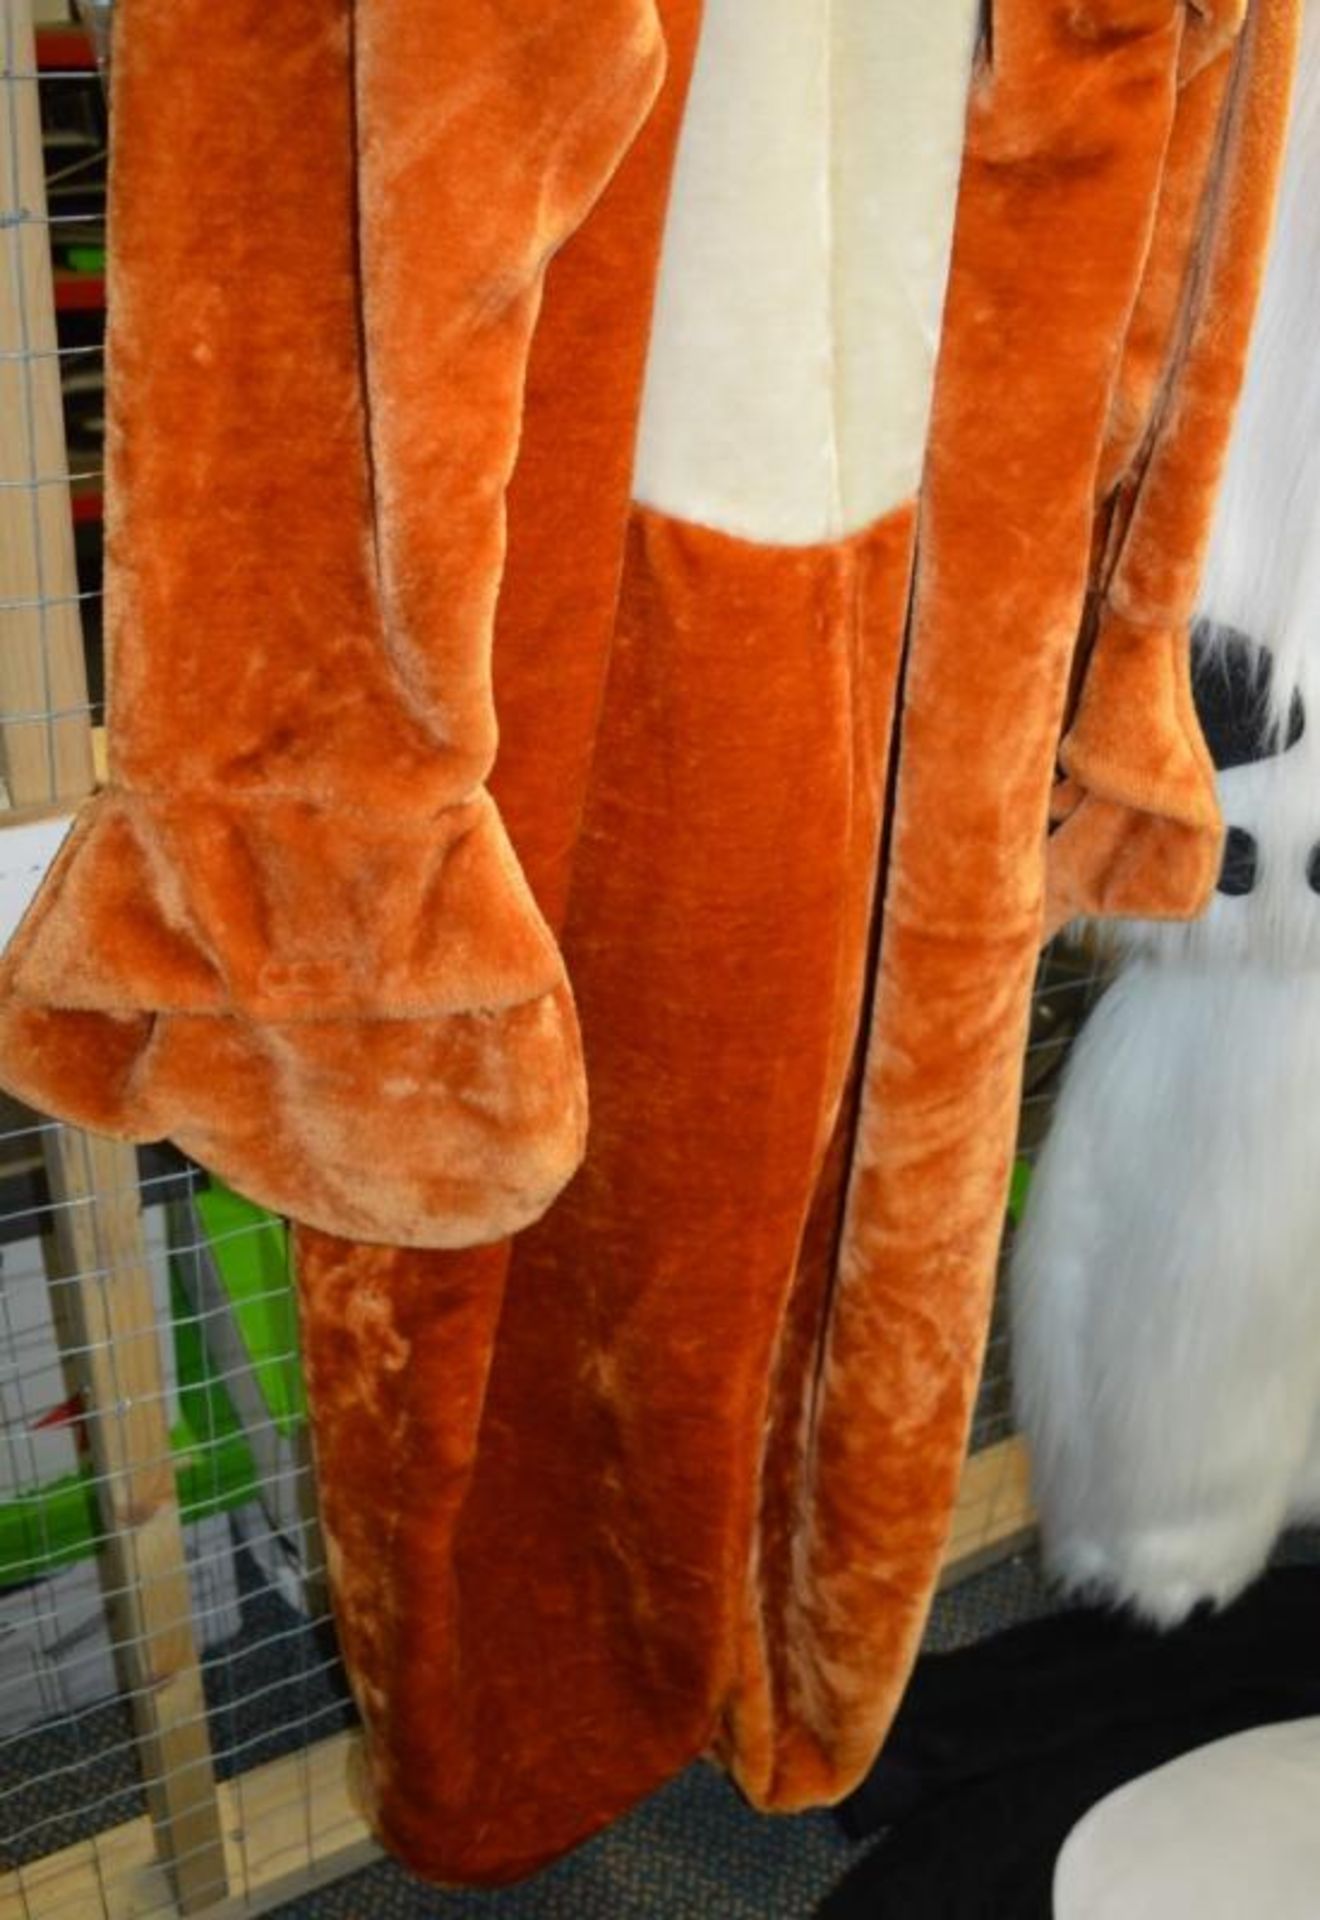 1 x Adult Size Fancy Dress / Mascot REINDEER Costume - Includes Suit, Feet and Head - Very Good Cond - Image 3 of 3